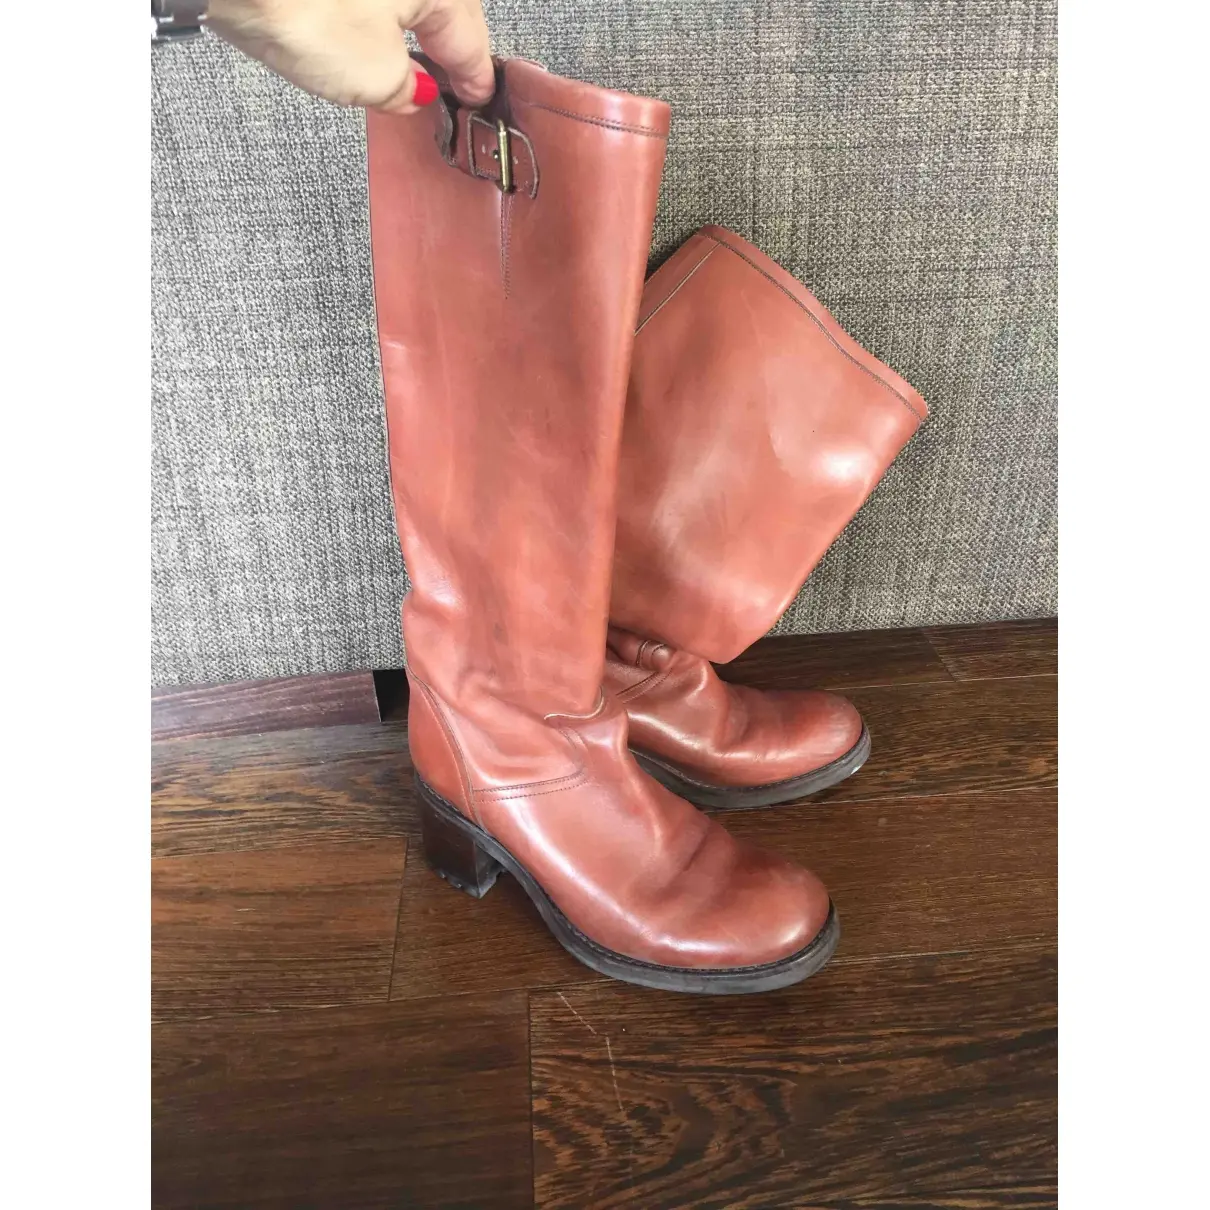 Free Lance Leather riding boots for sale